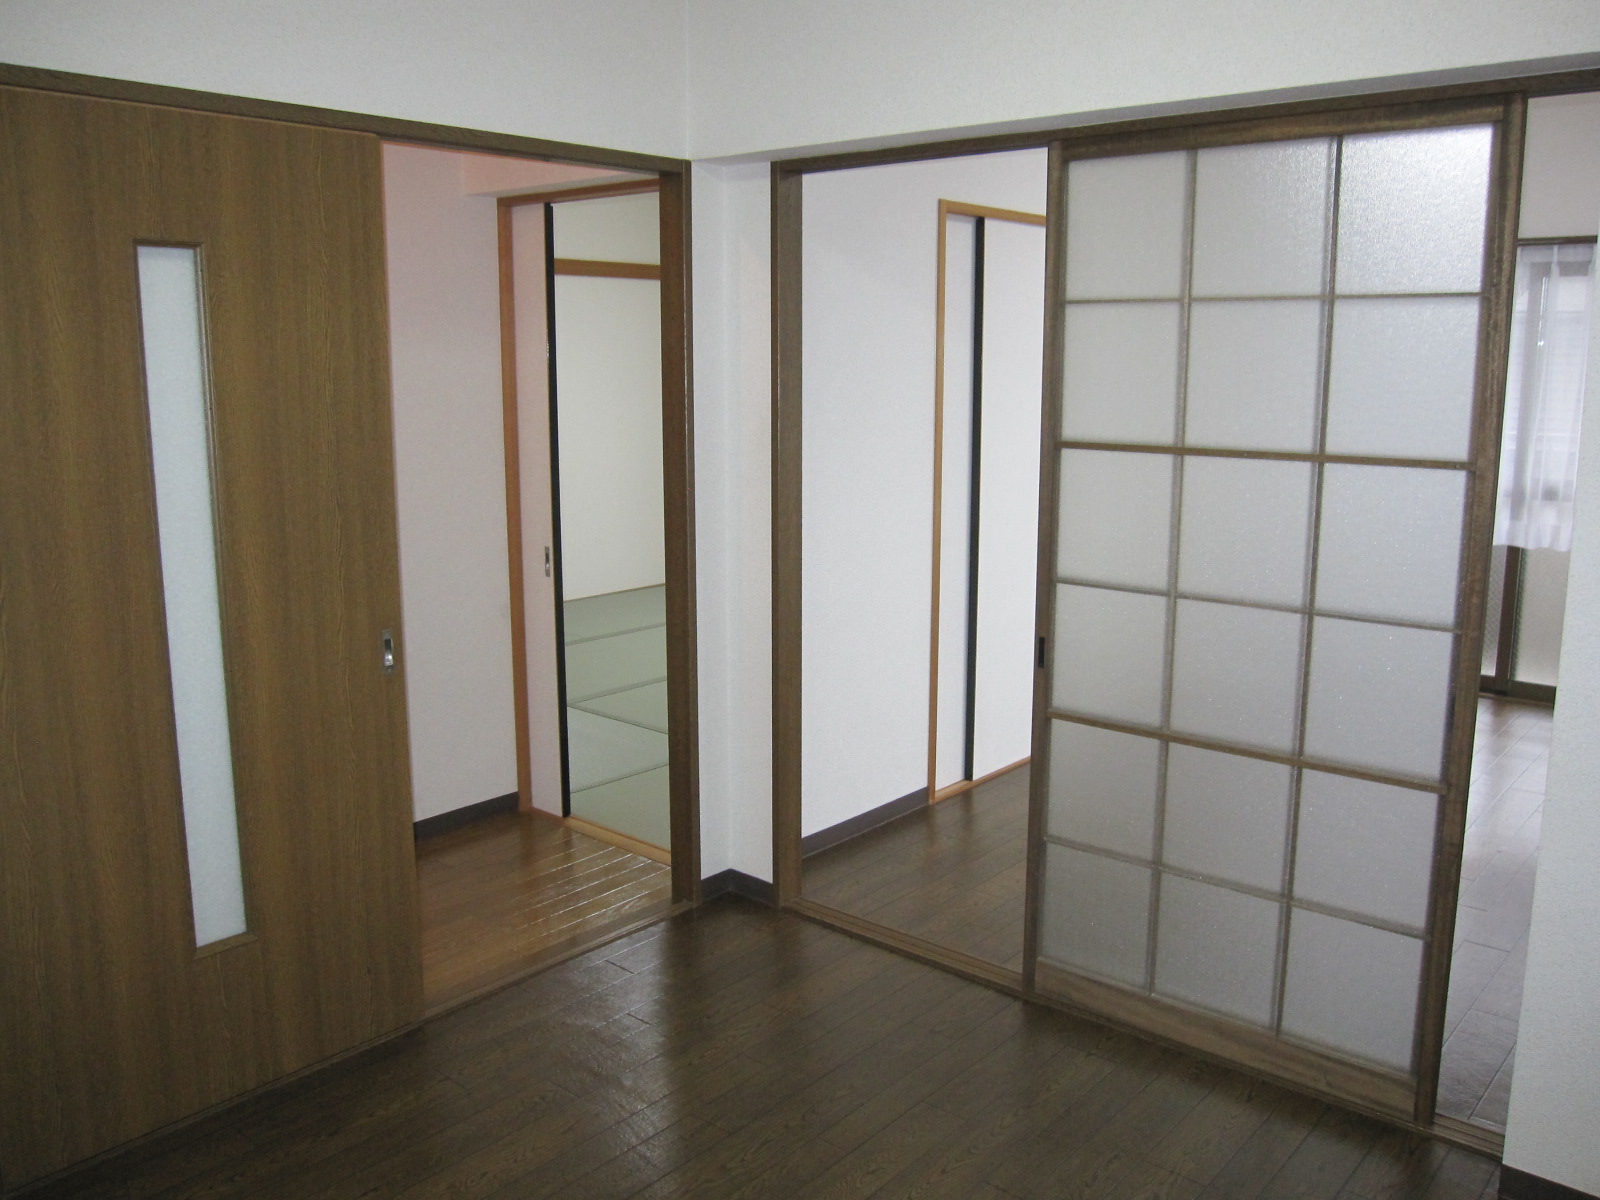 Living and room. The photograph is a room of the inverted type